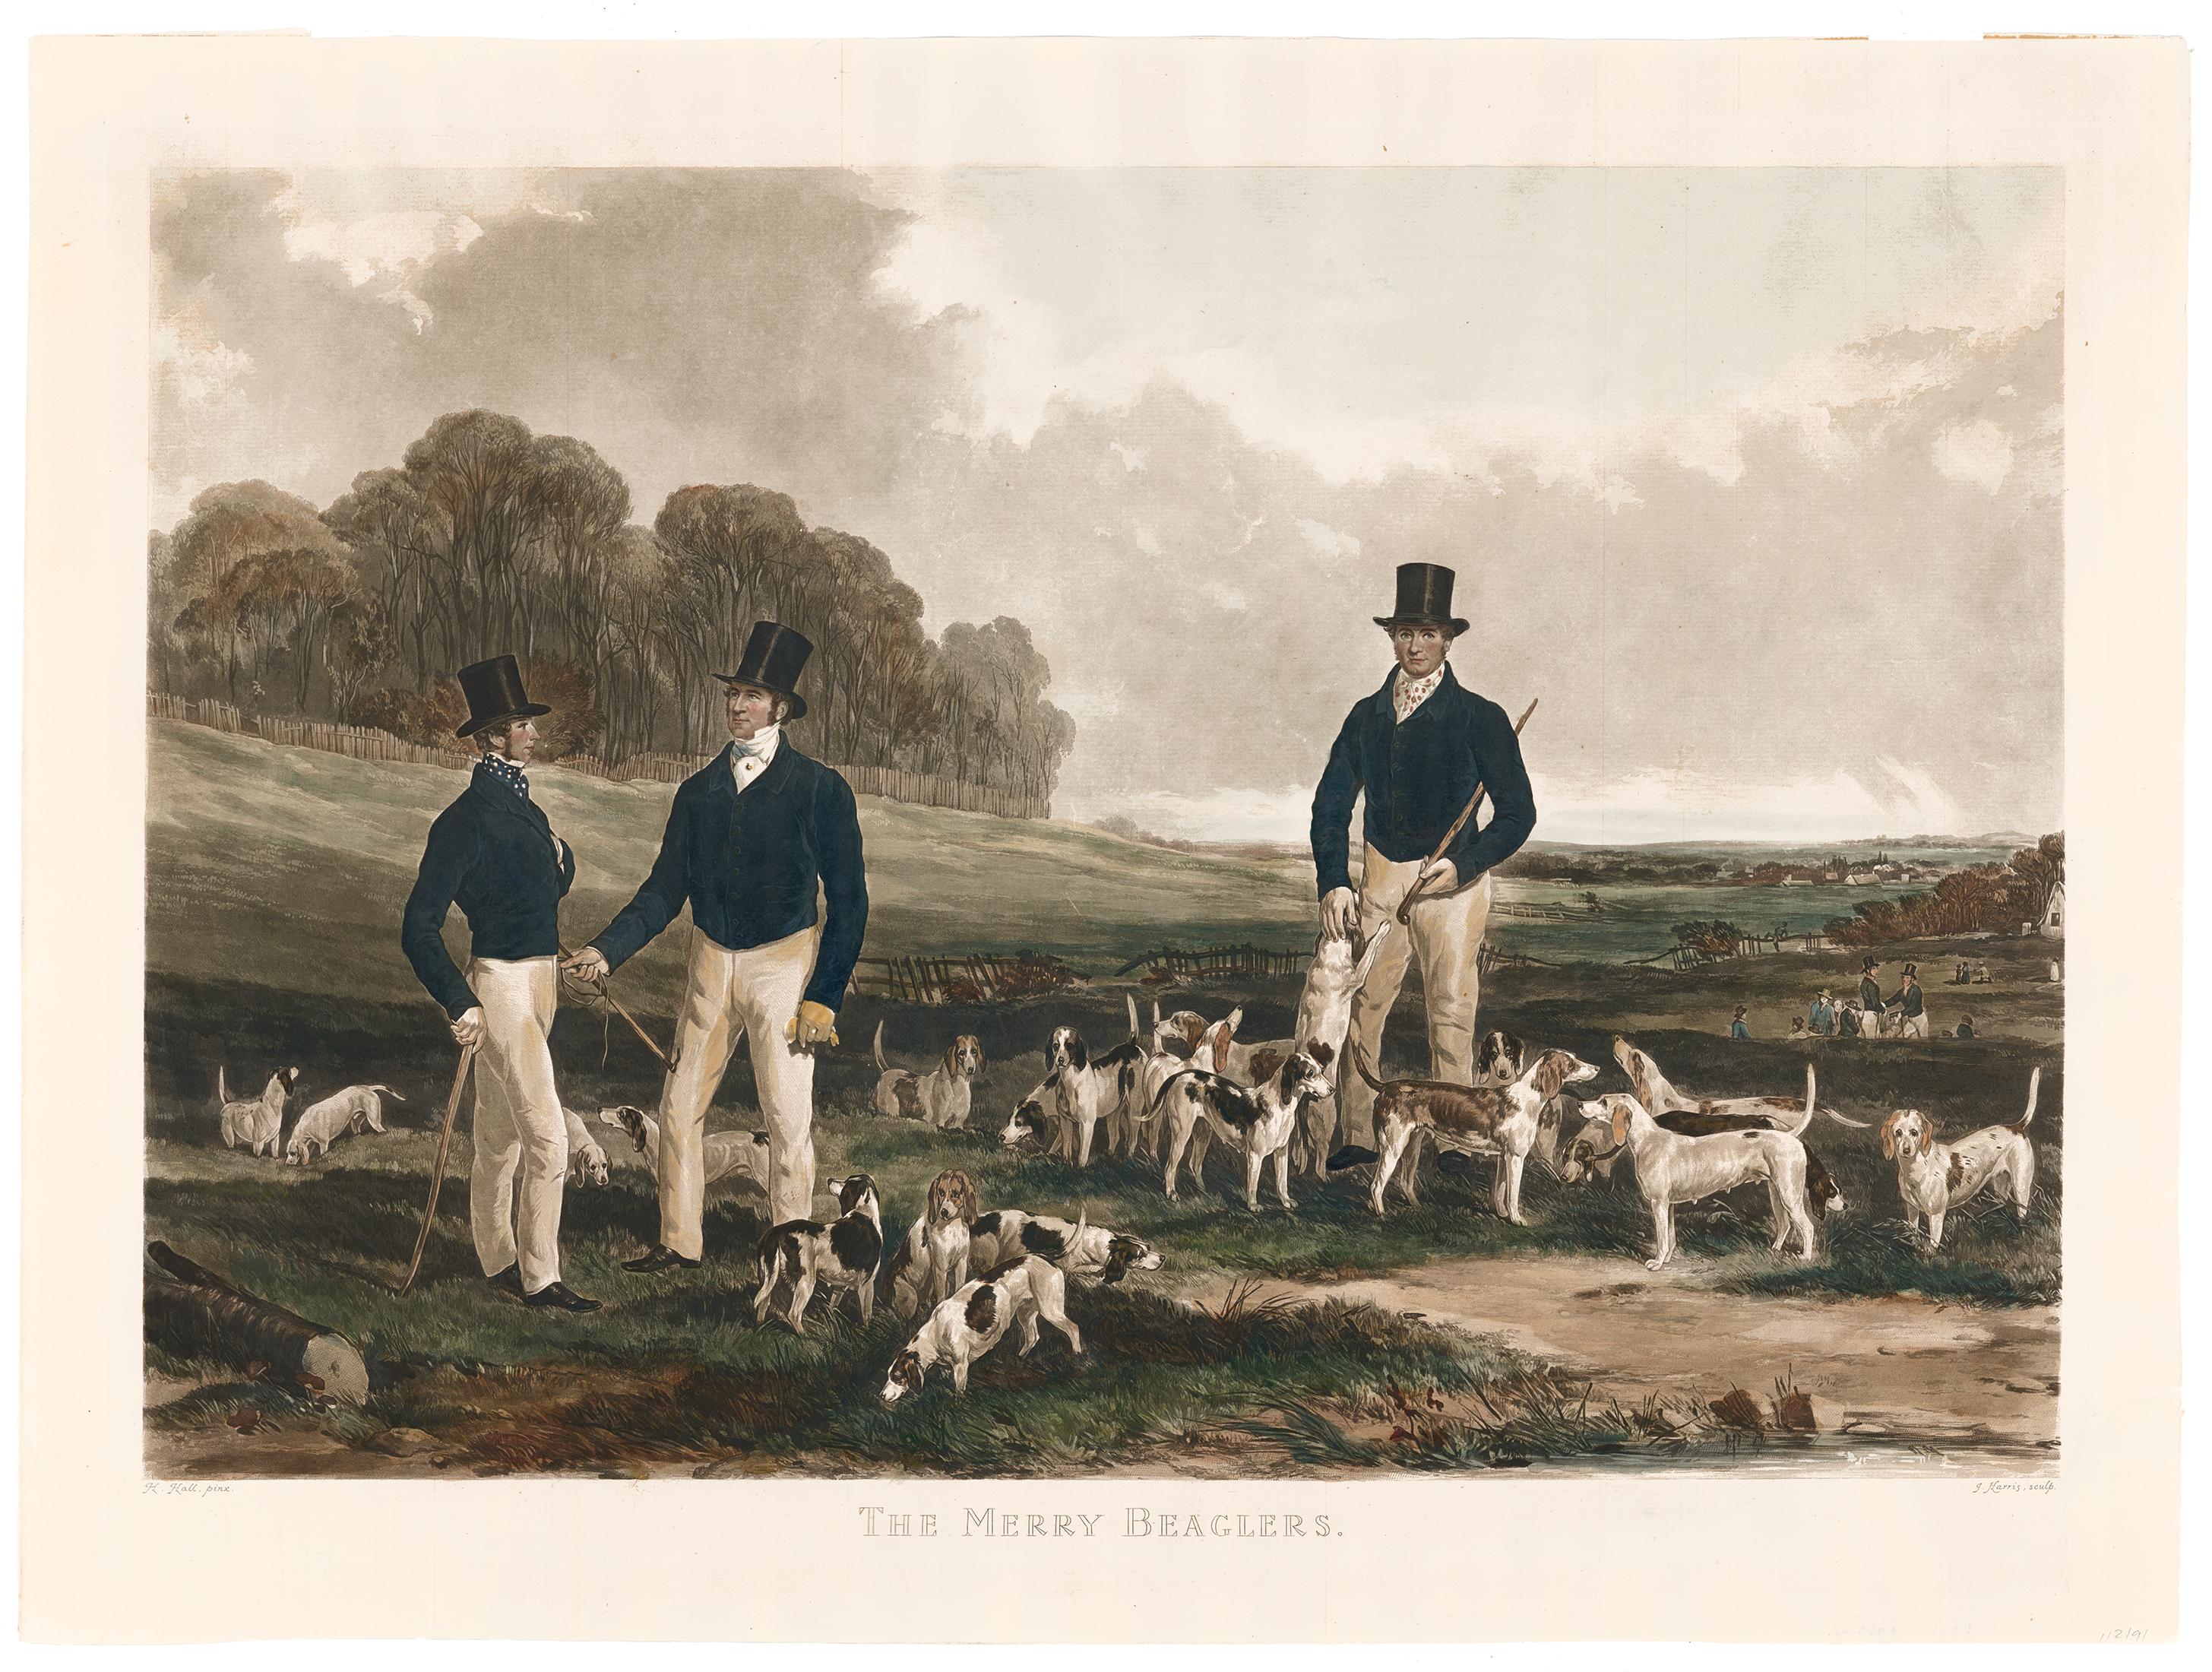 Merry Beaglers: Hunting Lithograph - Print by Harry Hall